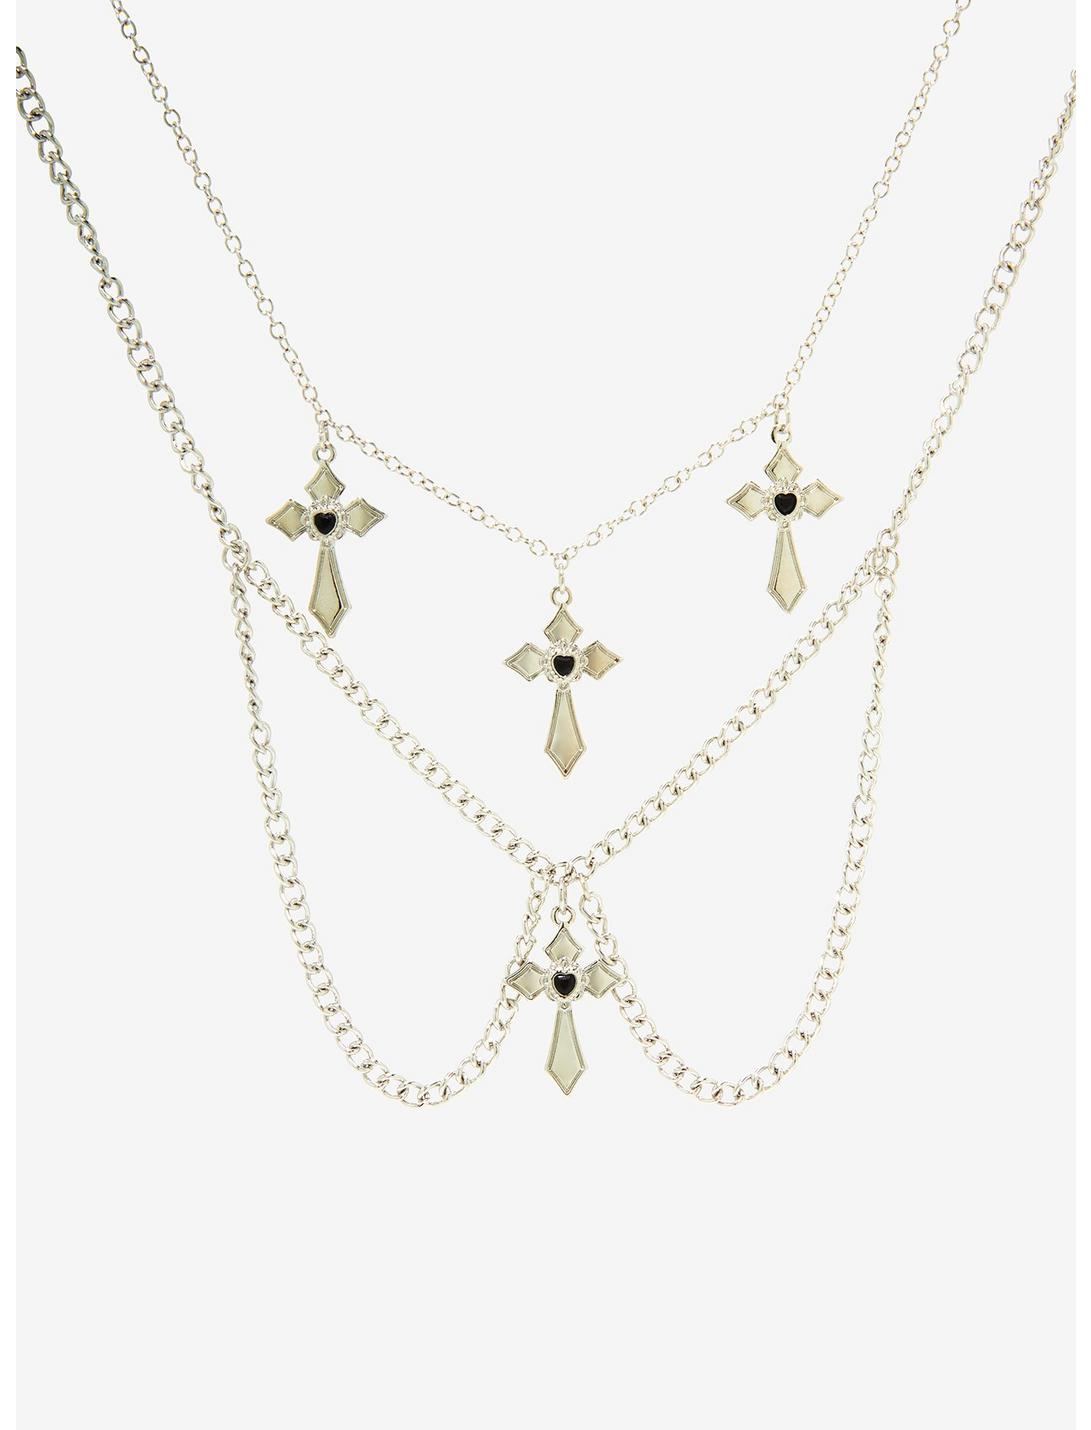 Social Collision Gothic Cross Tiered Necklace, , hi-res